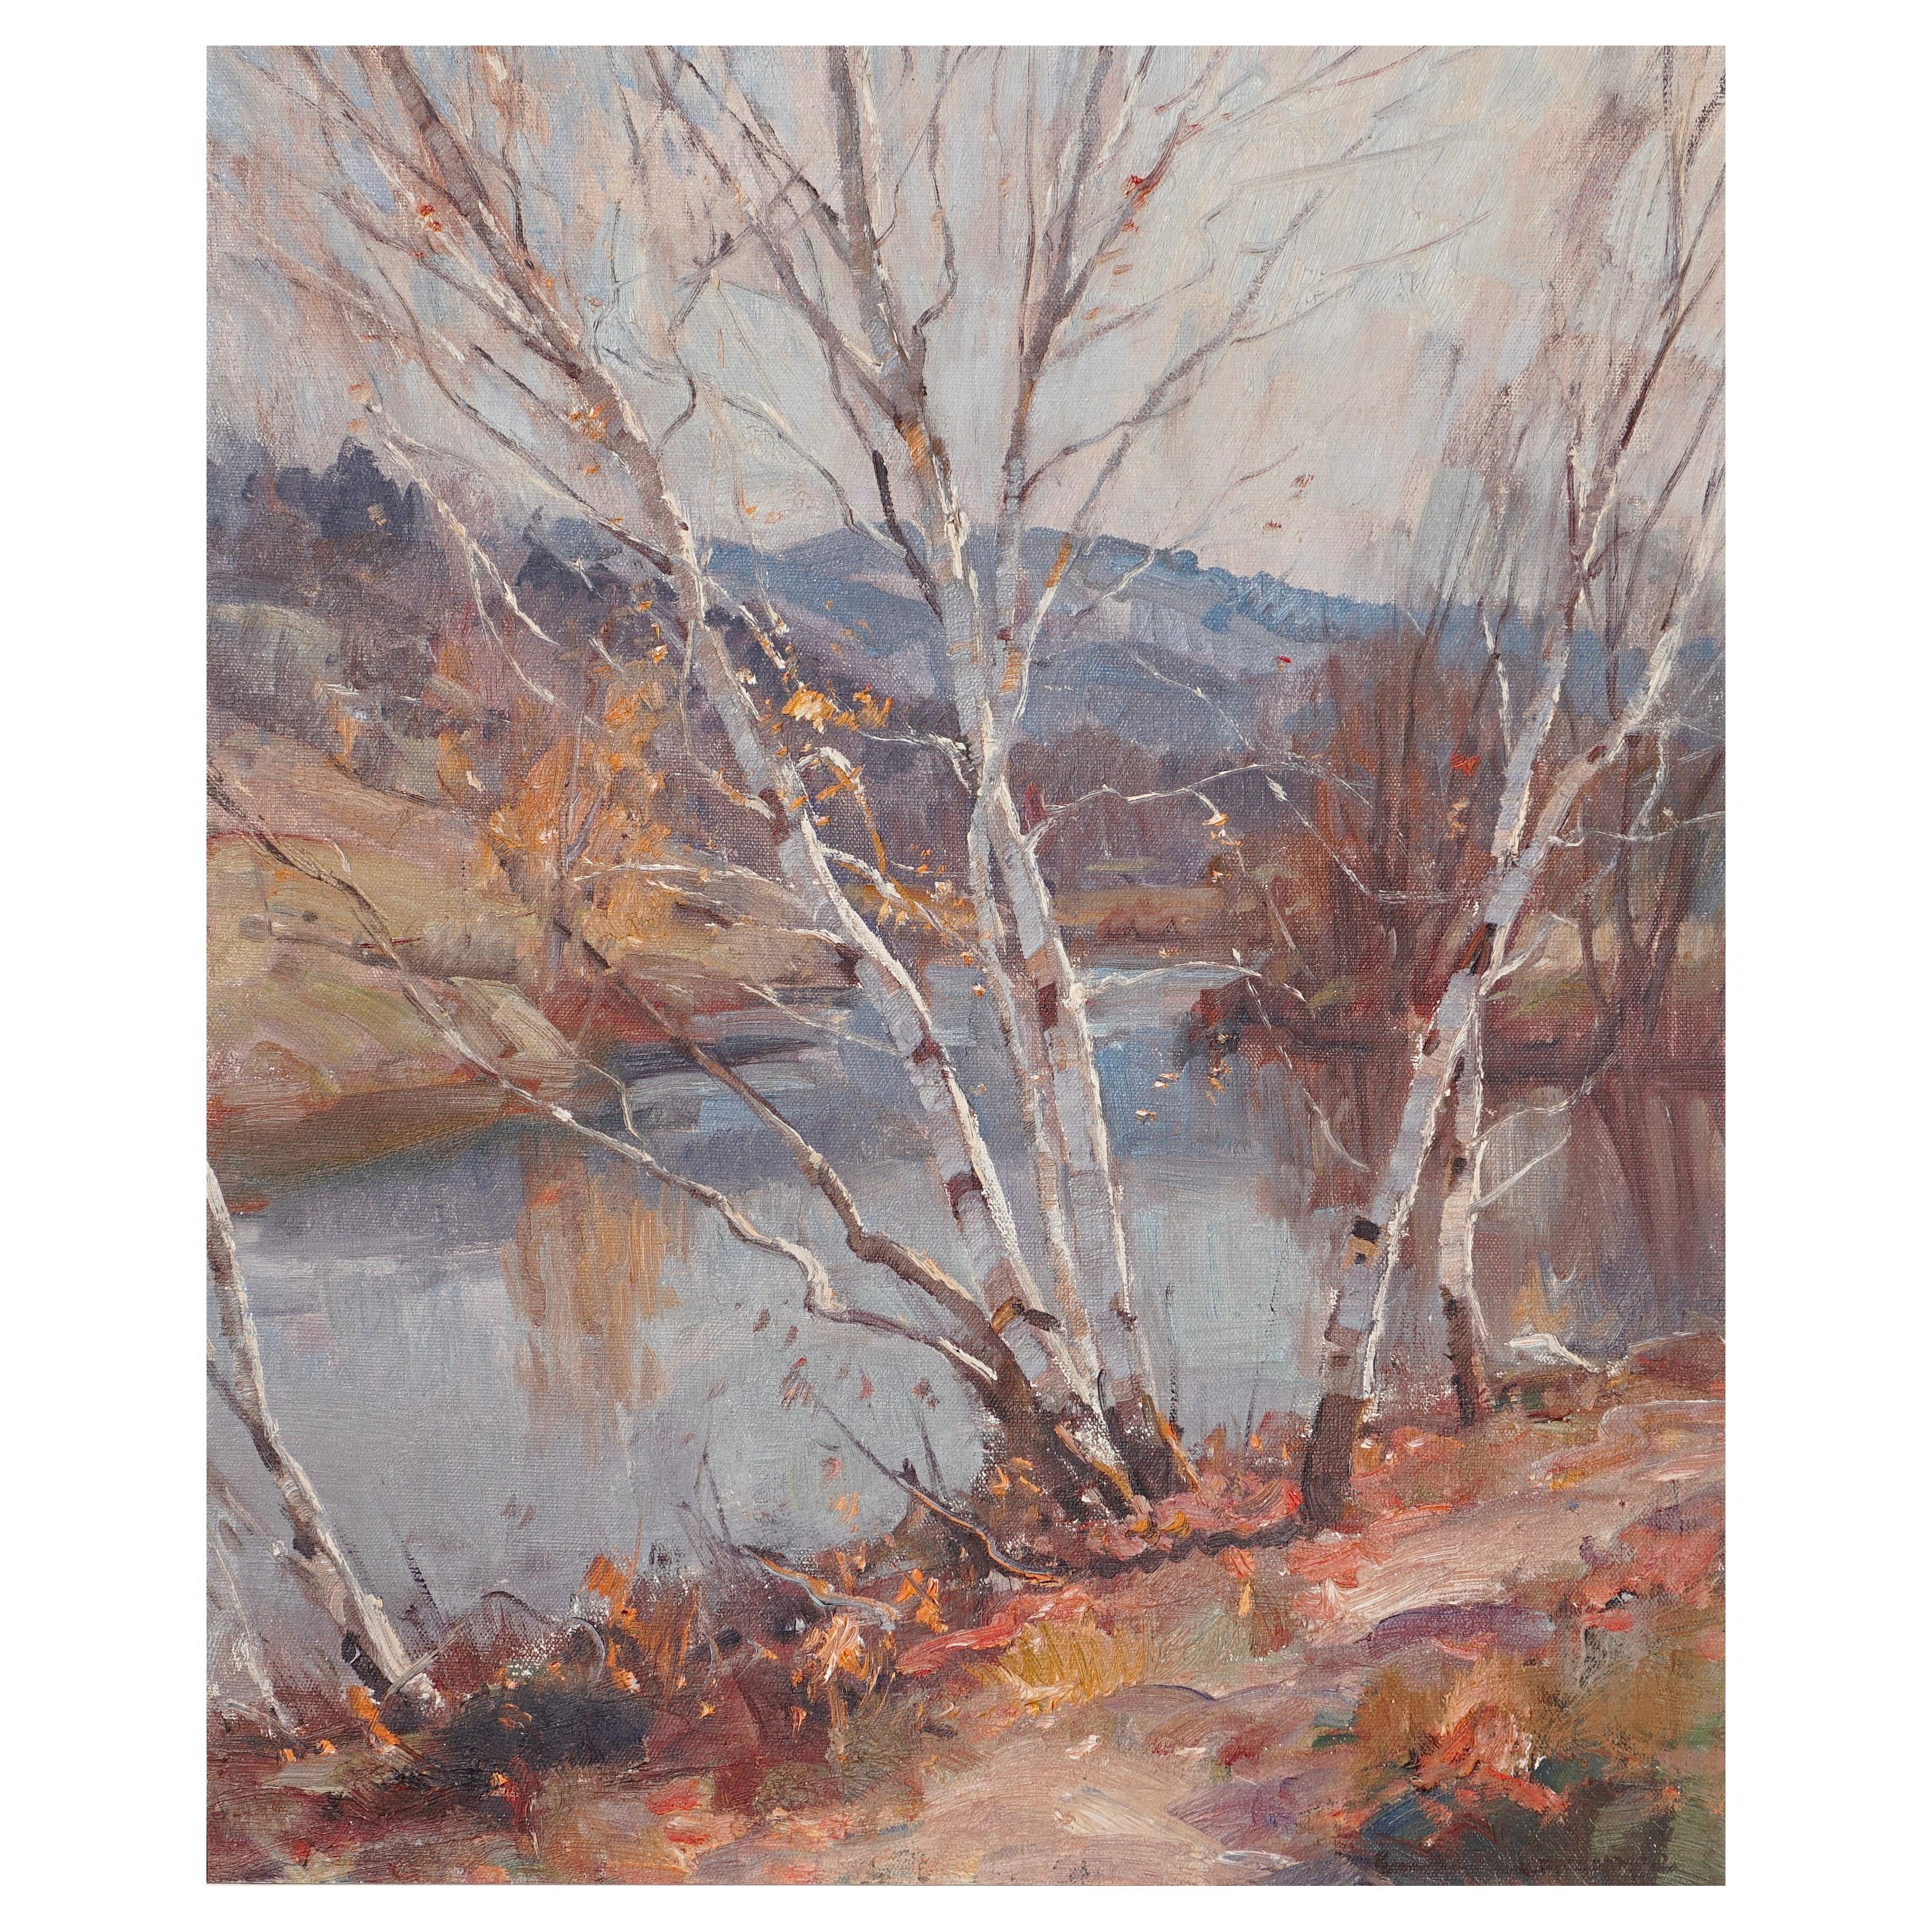 Emile Albert Gruppe (Am. 1896-1978) Oil Painting
Oil on canvas.
Titled on verso “Fall Birches Along The River By Emile A. Gruppe” 
Canvas: 20 x 24 Inches
Frame: 26 x 30 Inches

Another wonderful impressionist landscape rendering by Emile Gruppe of a